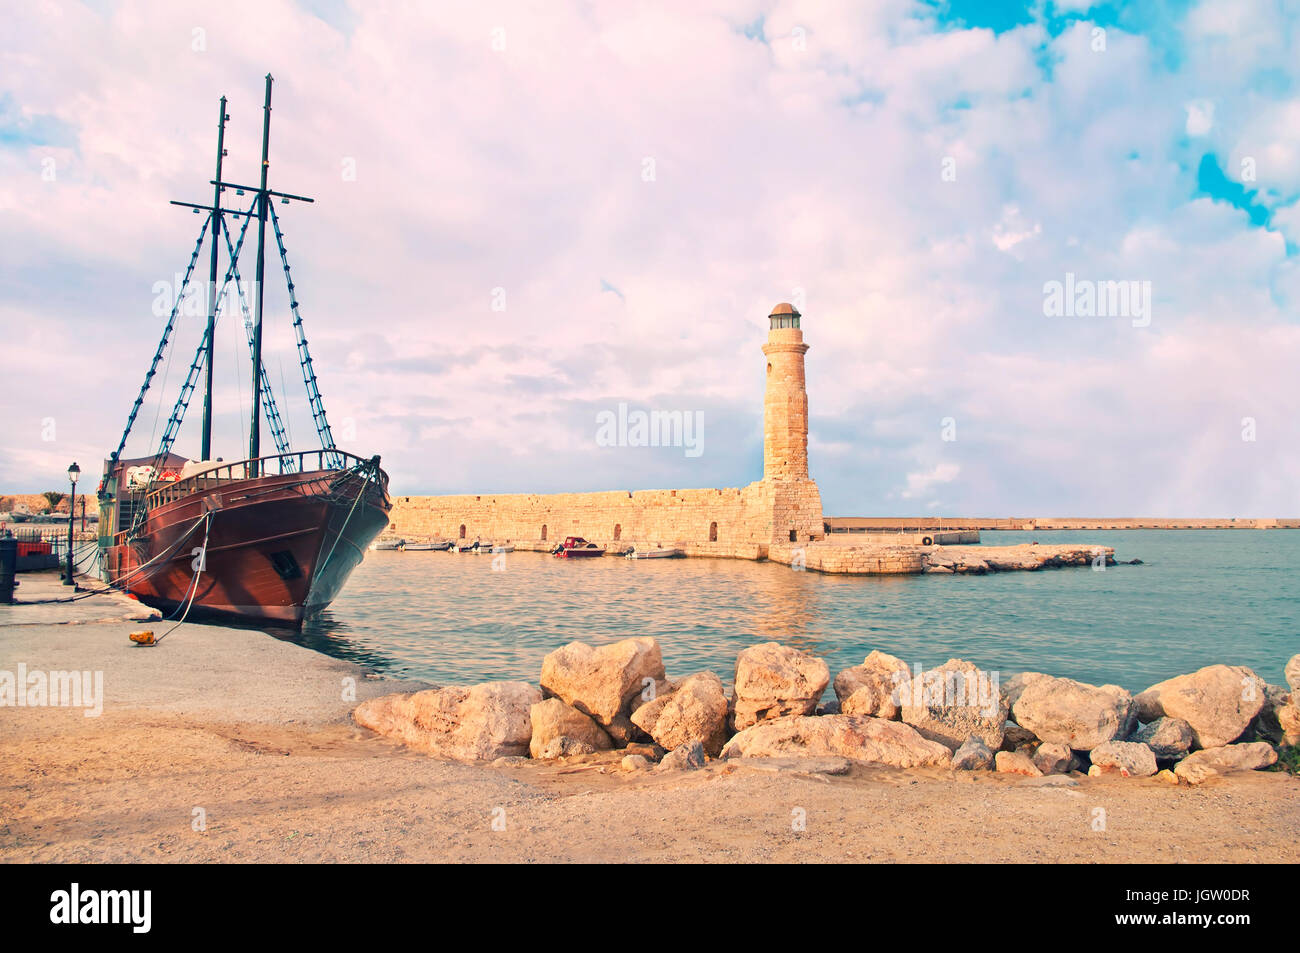 cross-processed image of old Venetian Lighthouse with old-style wooden ship moored in dock in warm sunset colours, Rethymno, Crete, Greece Stock Photo